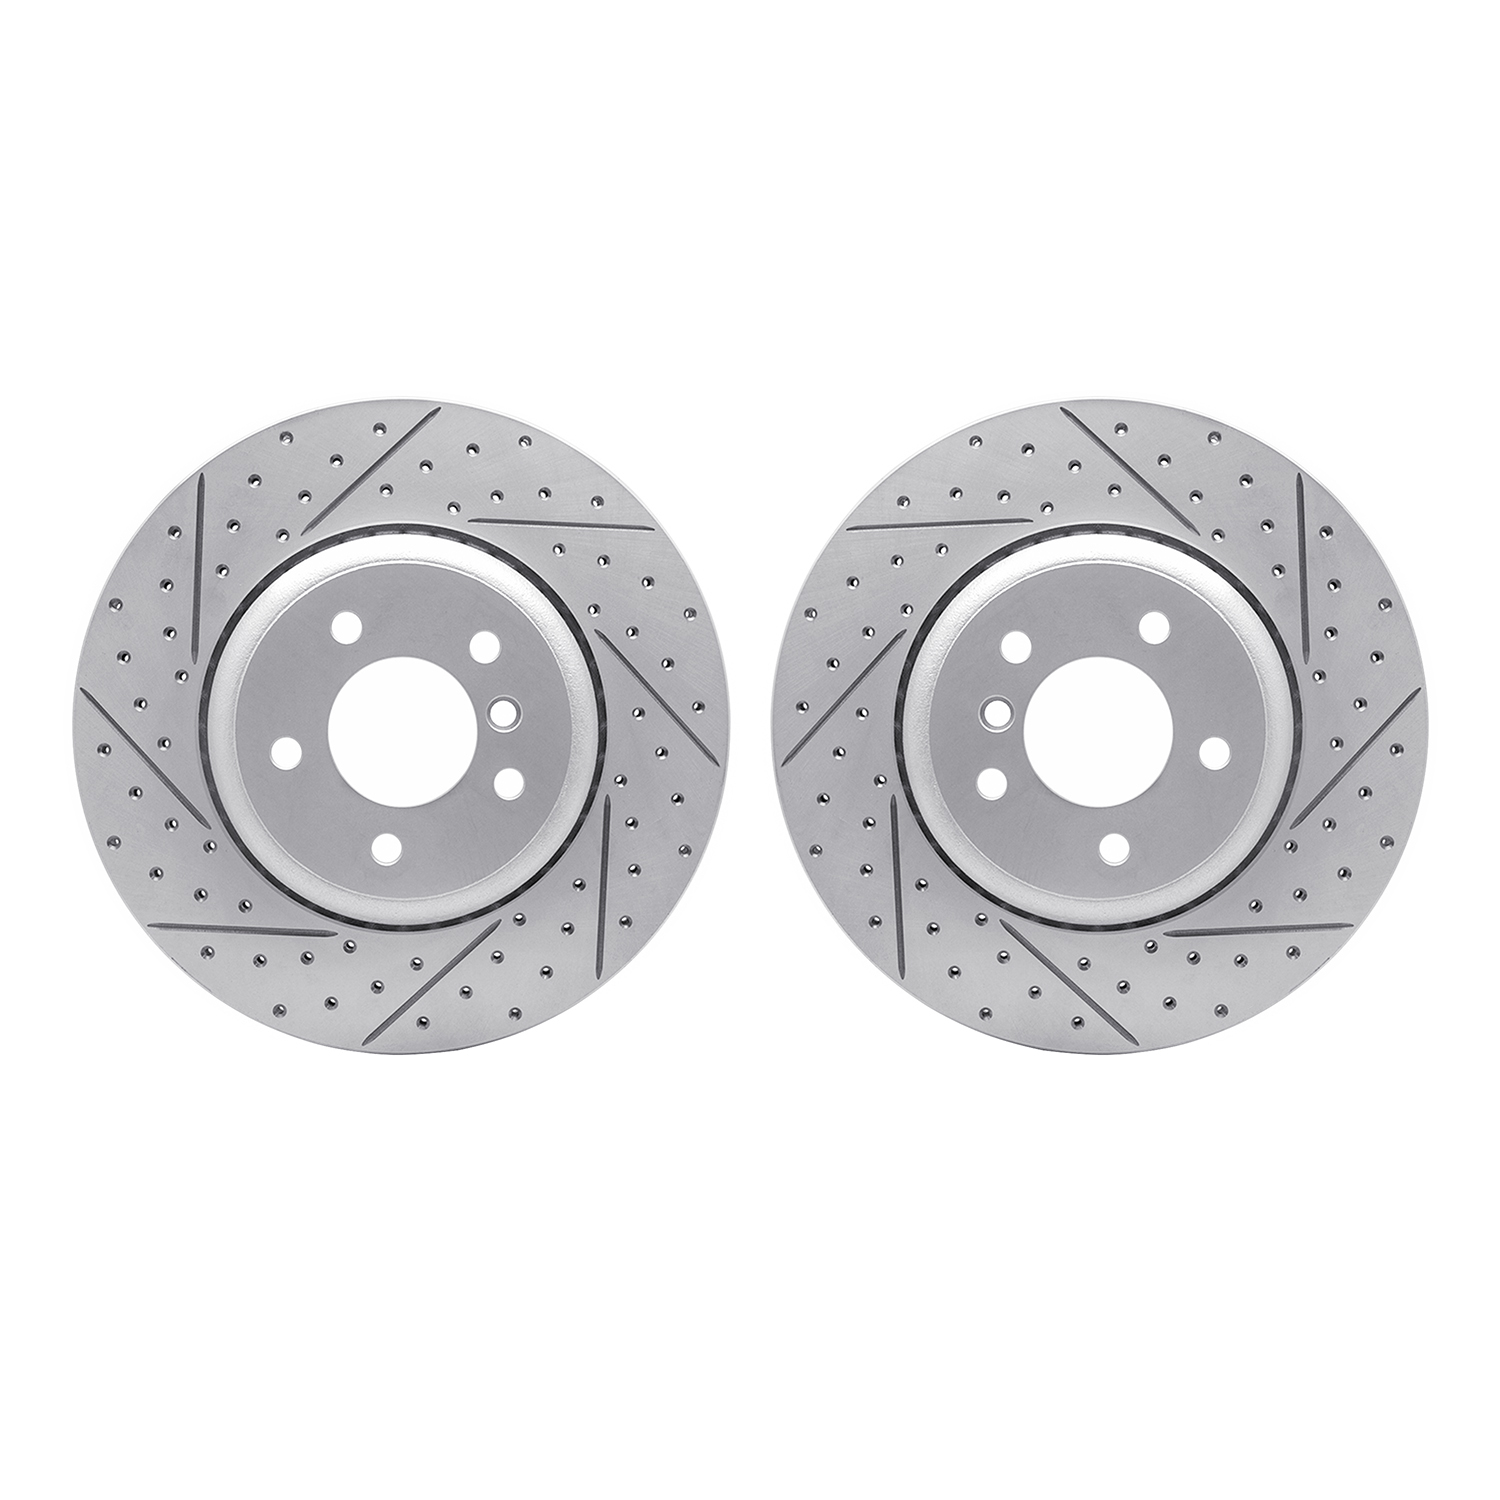 2002-31077 Geoperformance Drilled/Slotted Brake Rotors, 2004-2010 BMW, Position: Rear